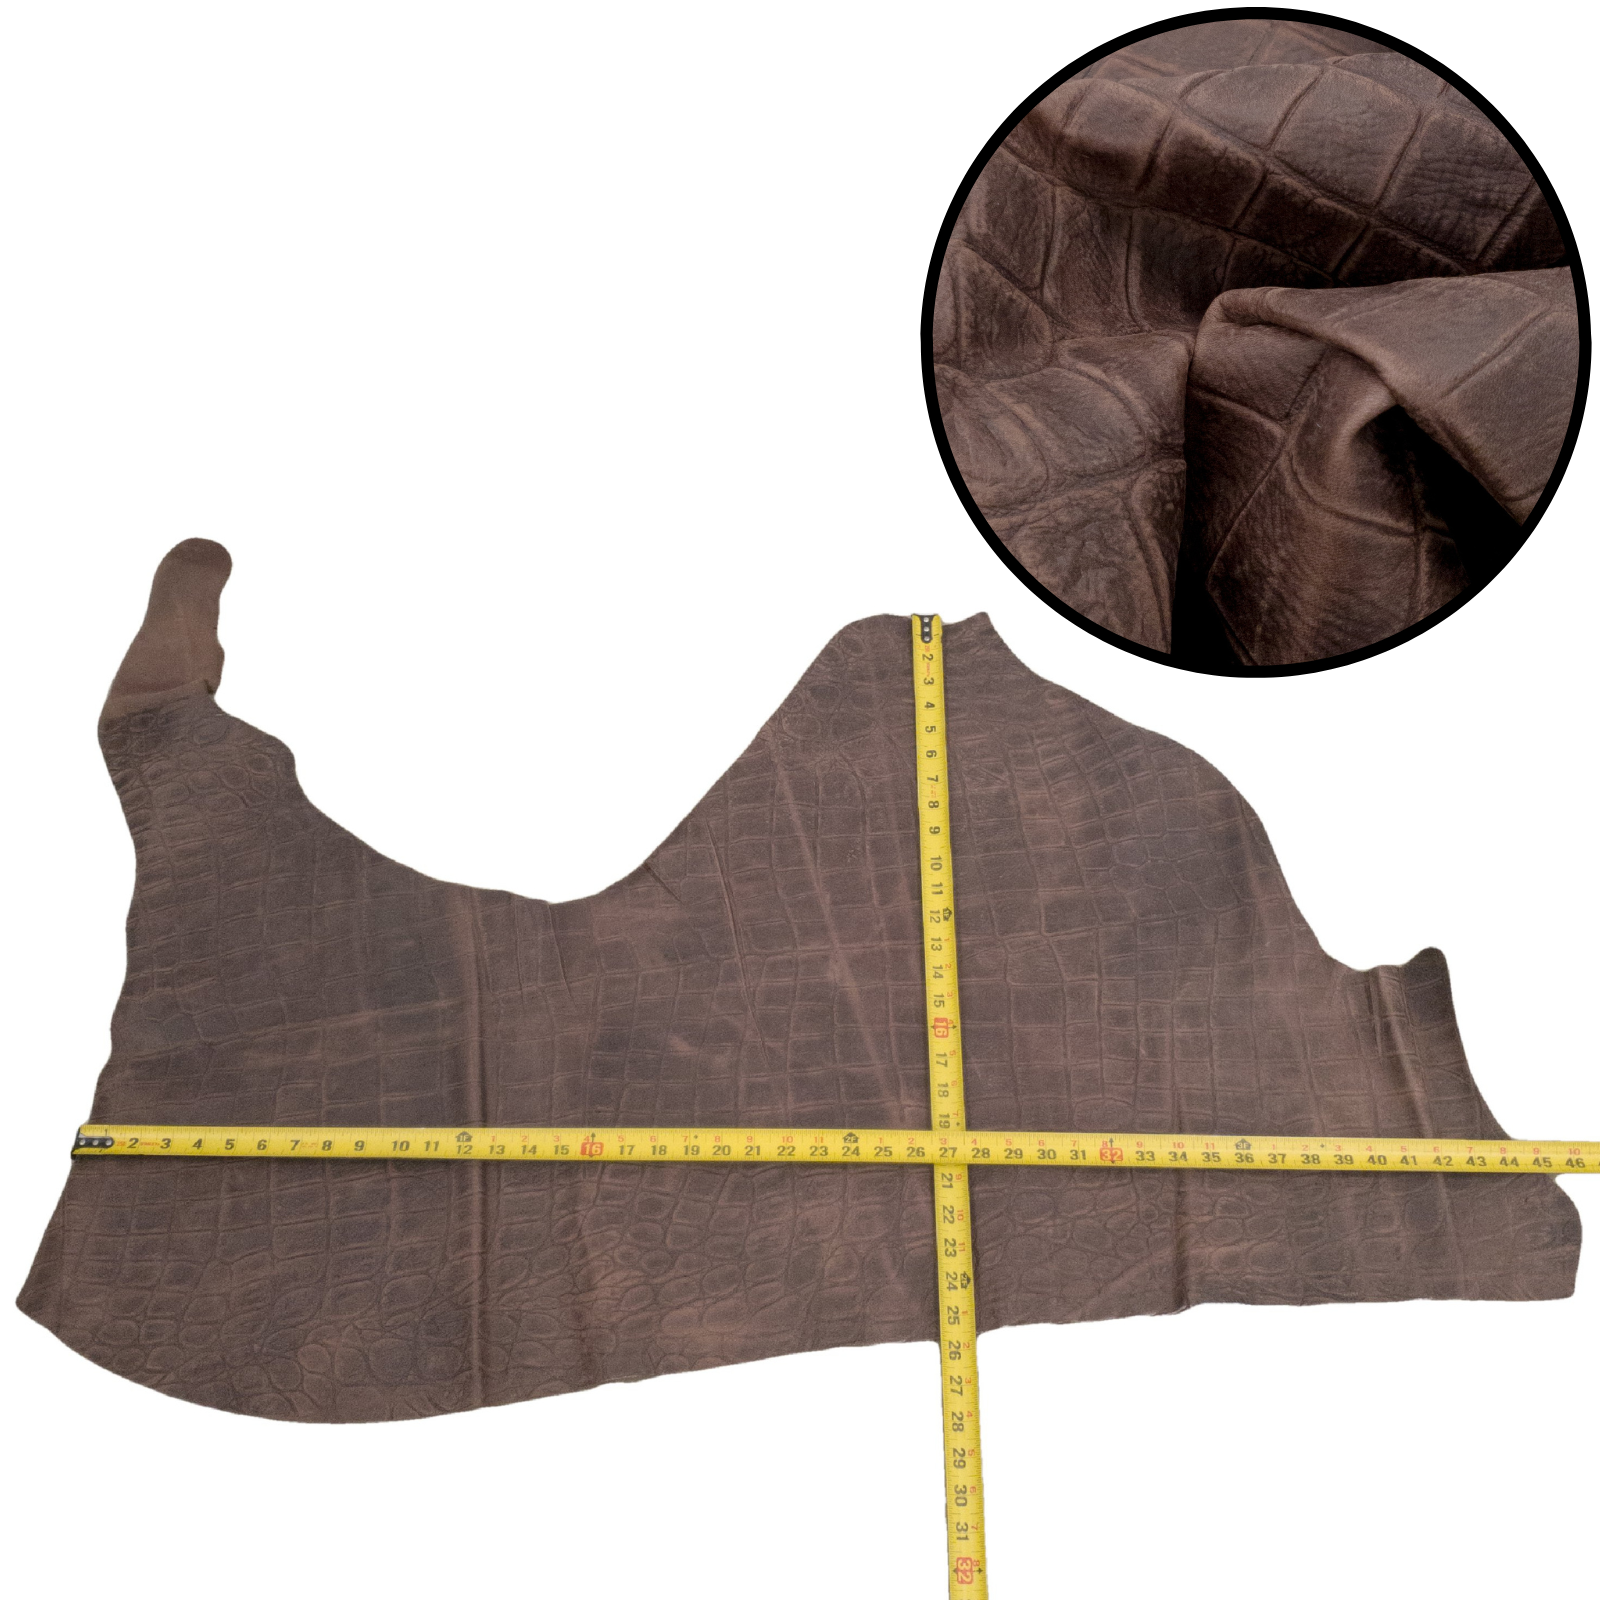 Embossed, 4-21 Sq Ft Upholstery Cowhide Project Pieces, Cinnamon Soot / 6 / 2 | The Leather Guy